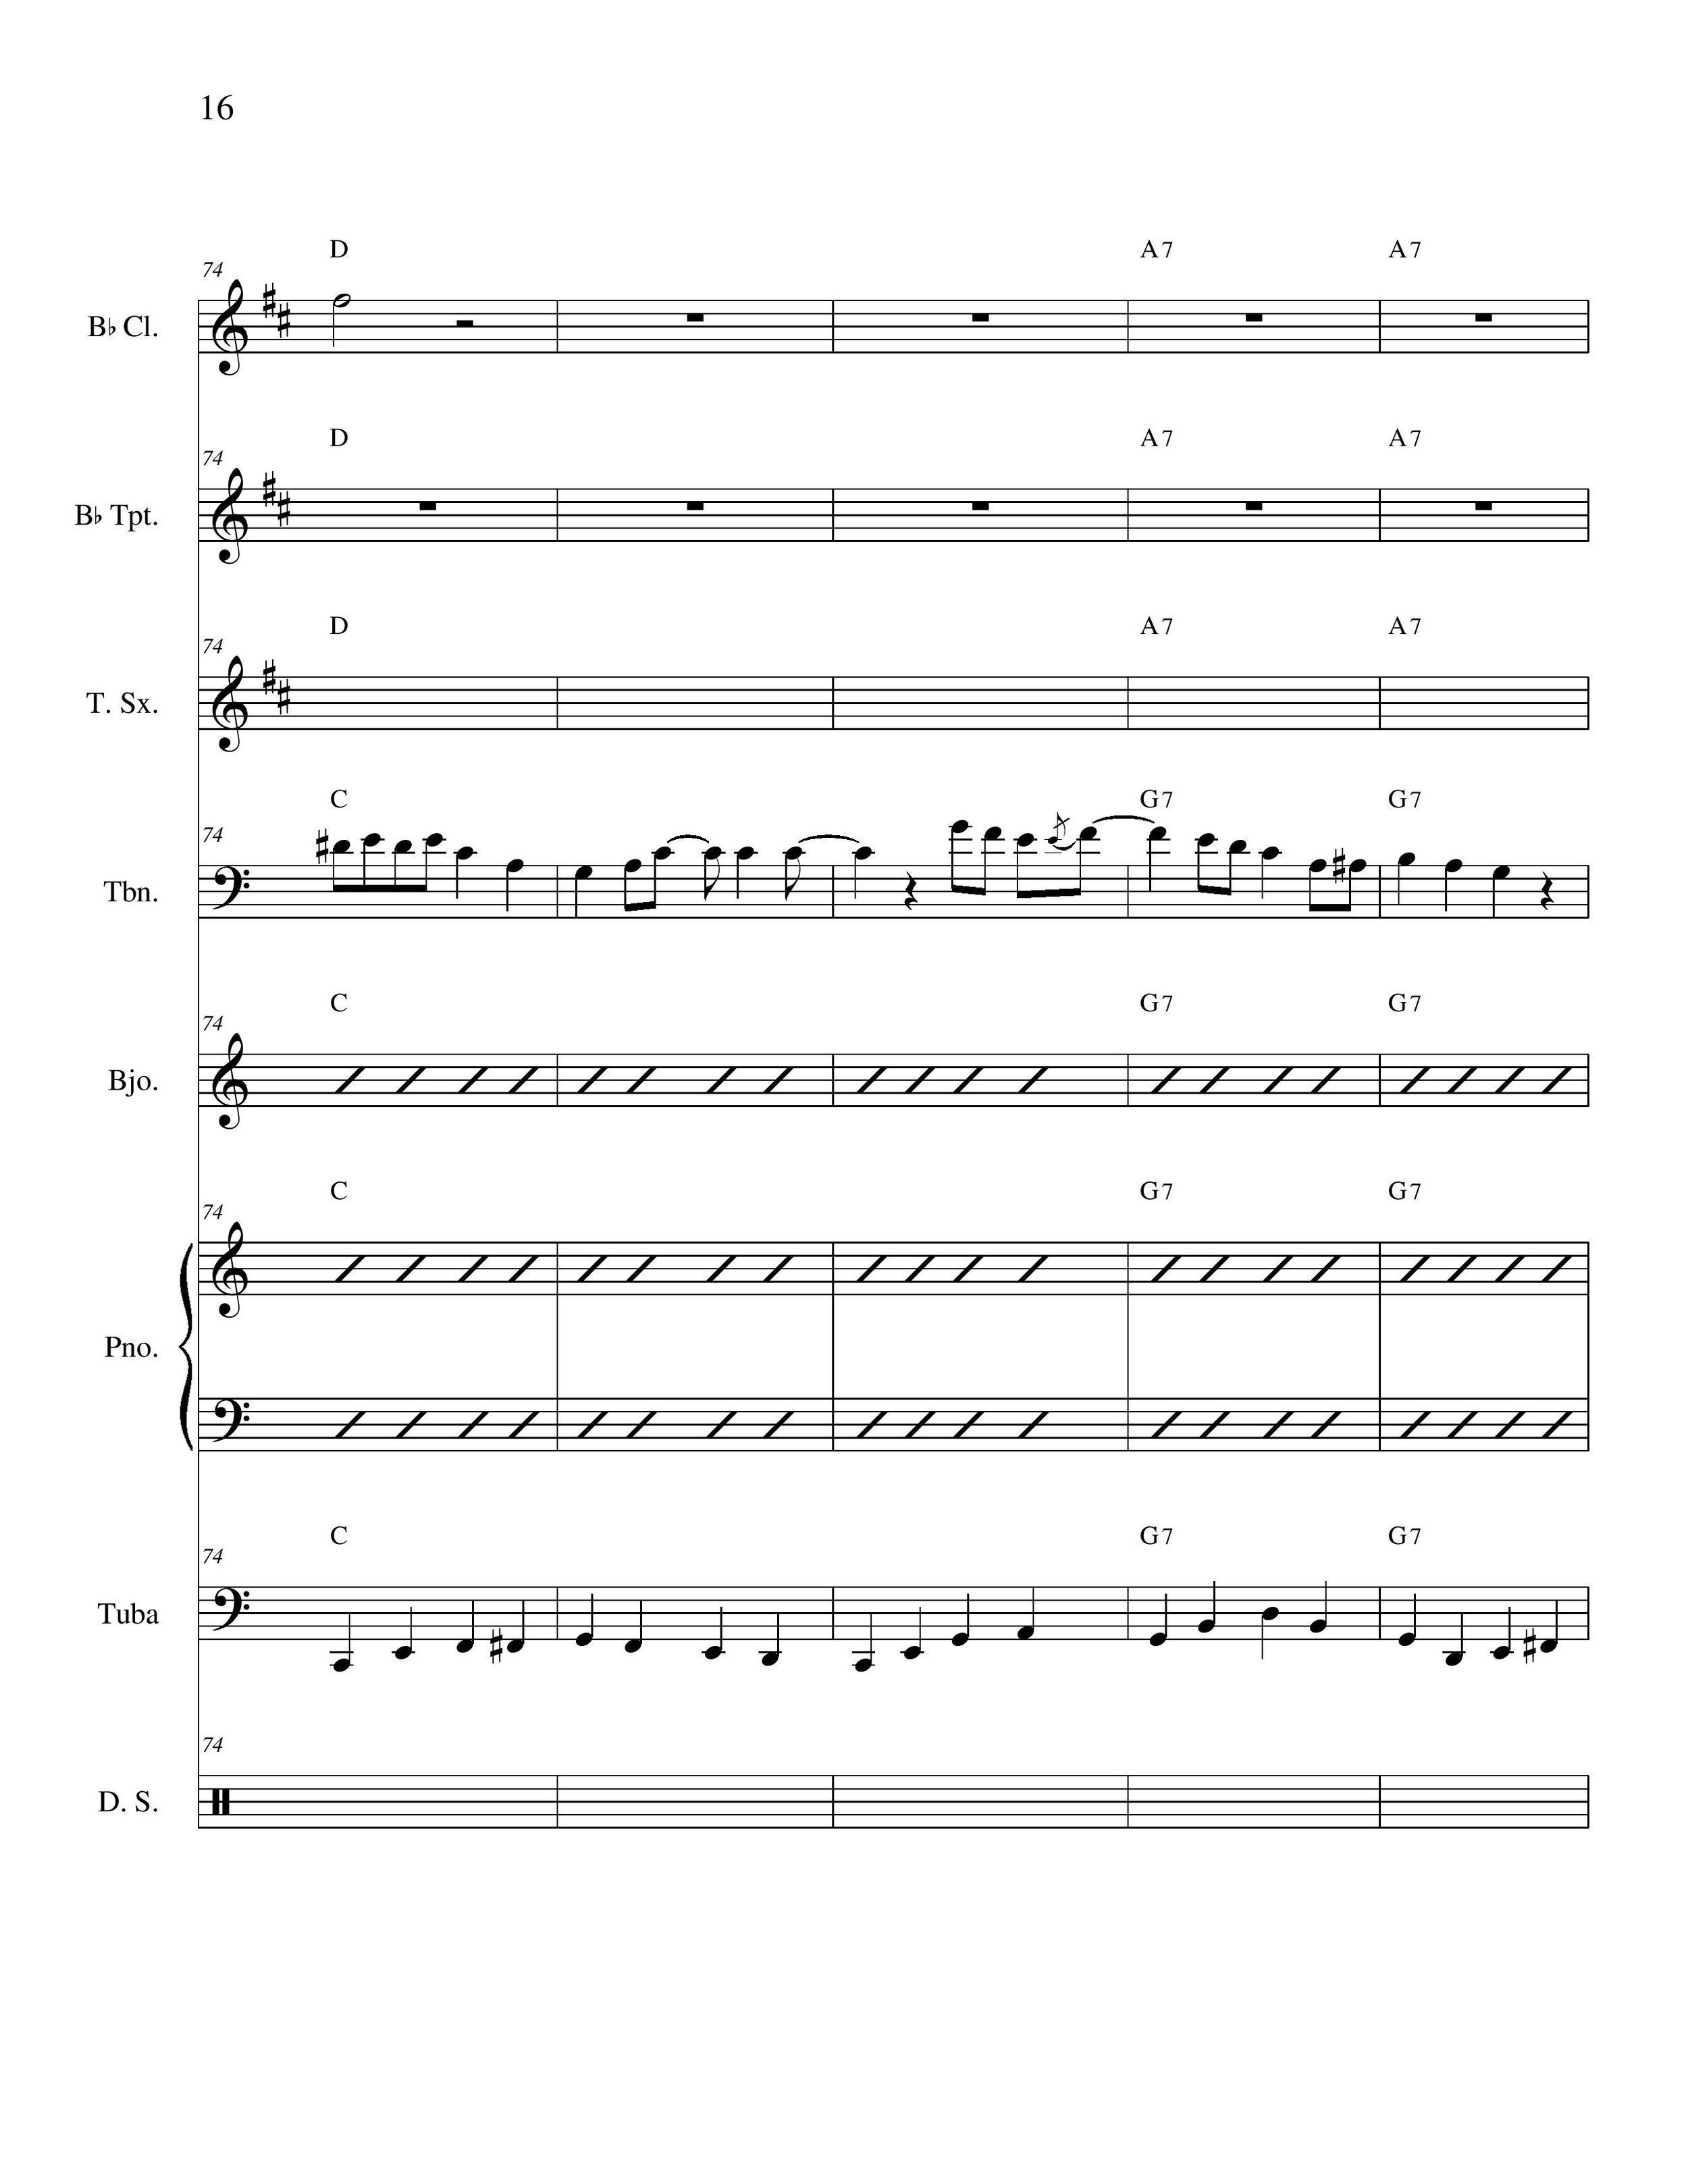 Rudolph the Red-Nosed Reindeer - Score_16.jpg